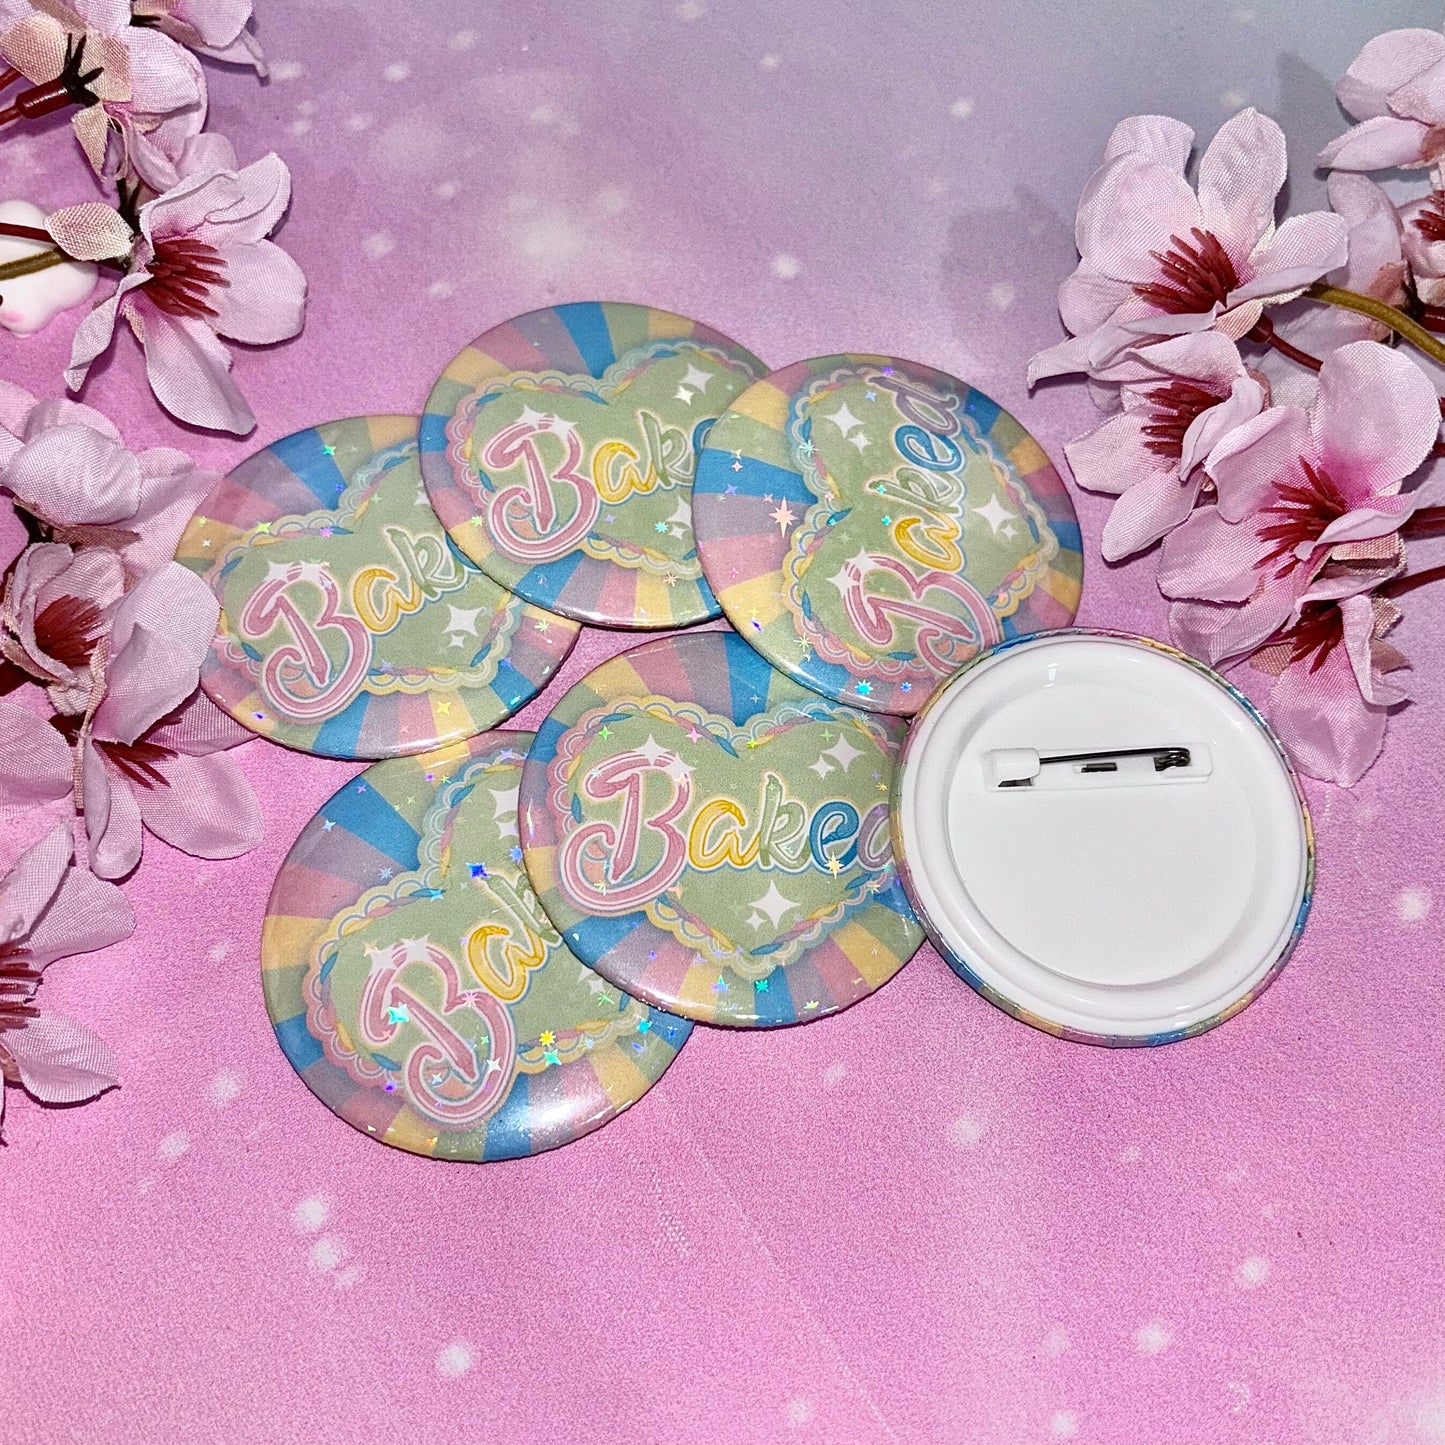 Baked Button Pin | cute button pins, cute pins, Kawaii pins, Kawaii, cannabis pins, canna babes, canna lover, stoners